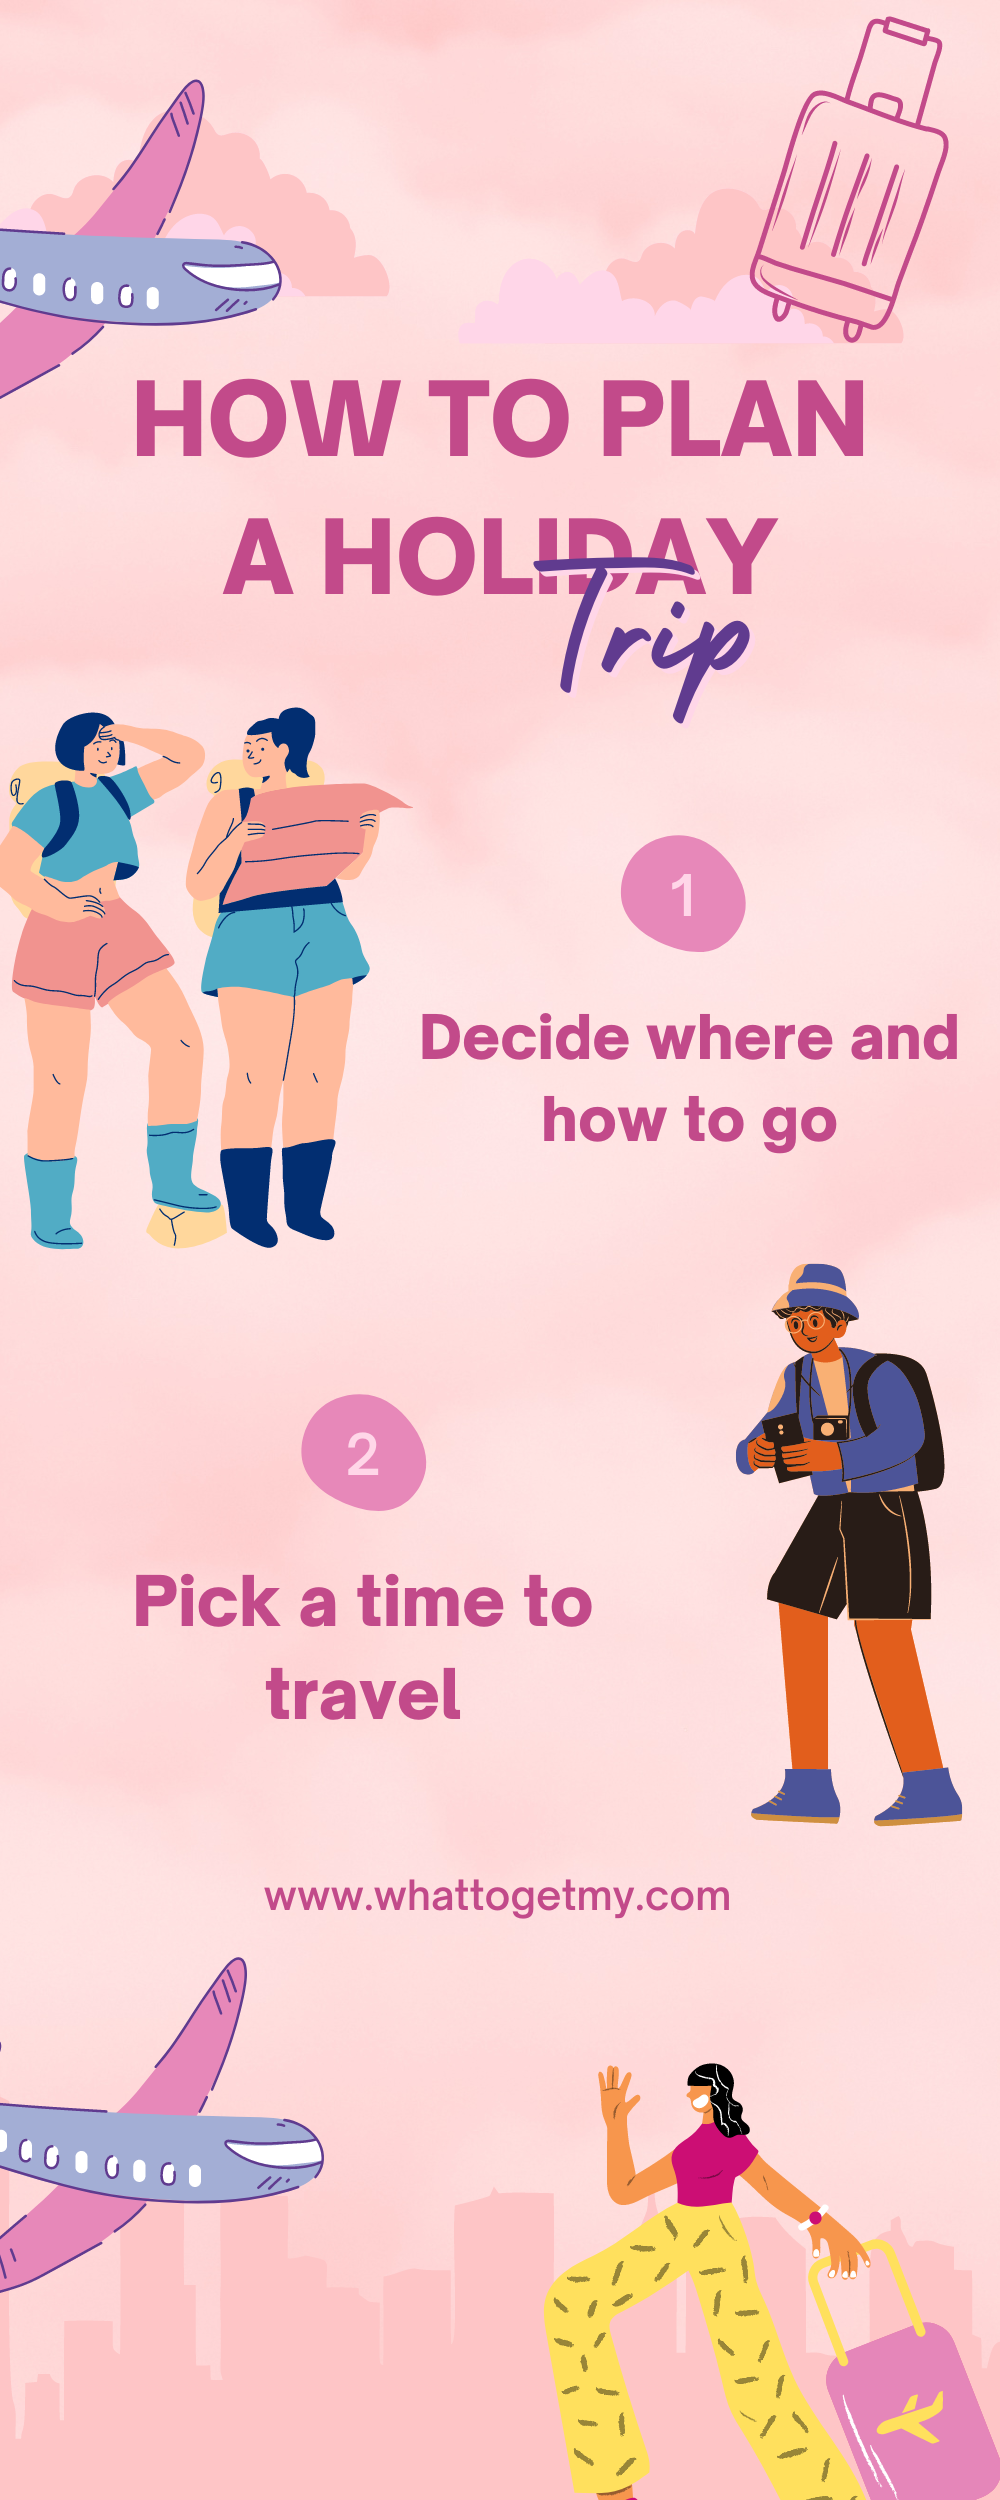 How To plan a Holiday Trip